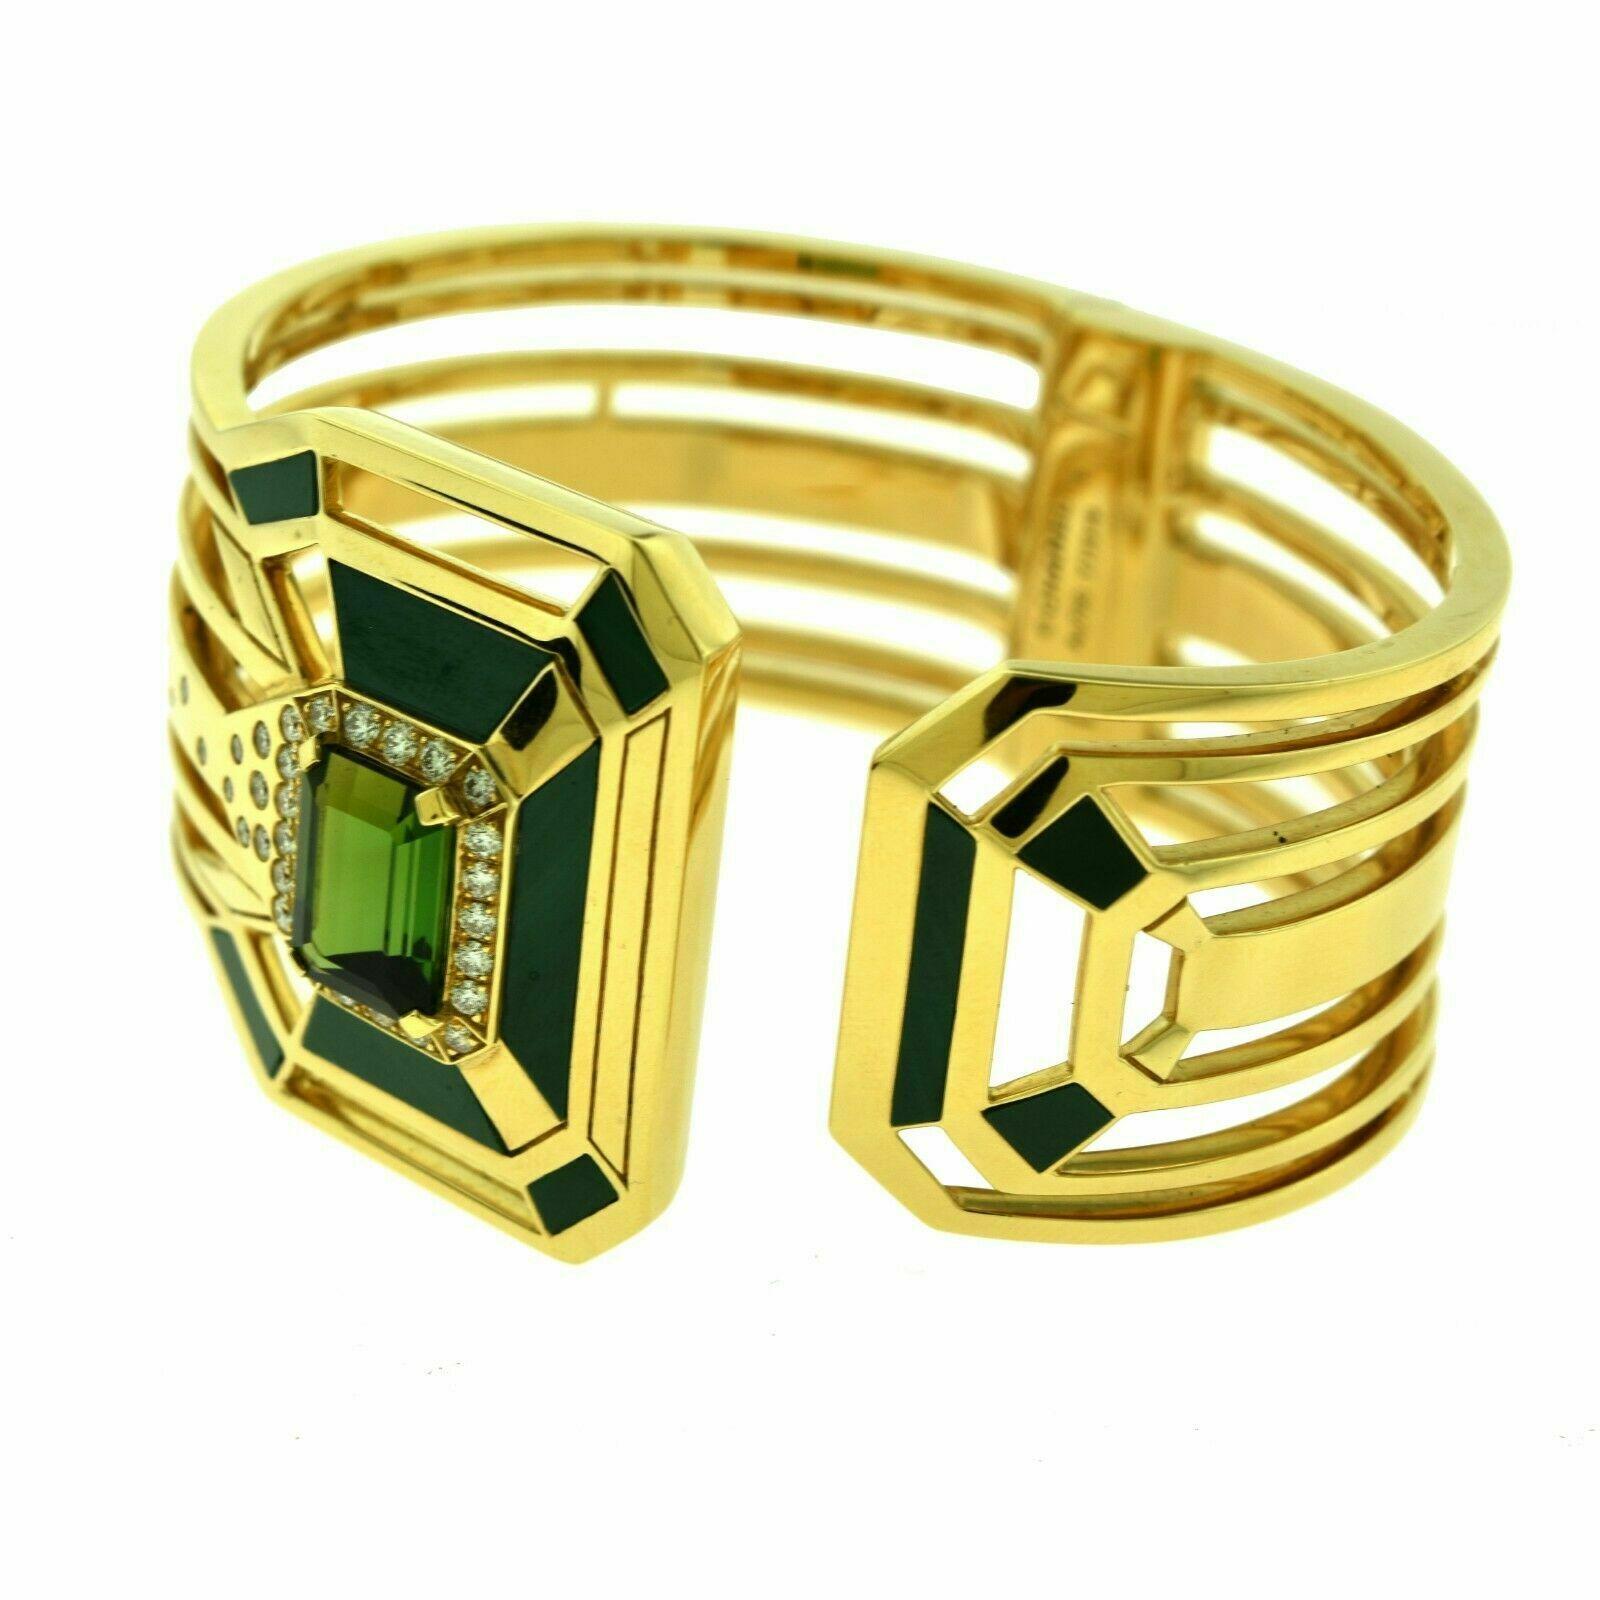 Women's or Men's Chanel My Green Jewelry Gallery Collection Gold Choker Bangle Set For Sale